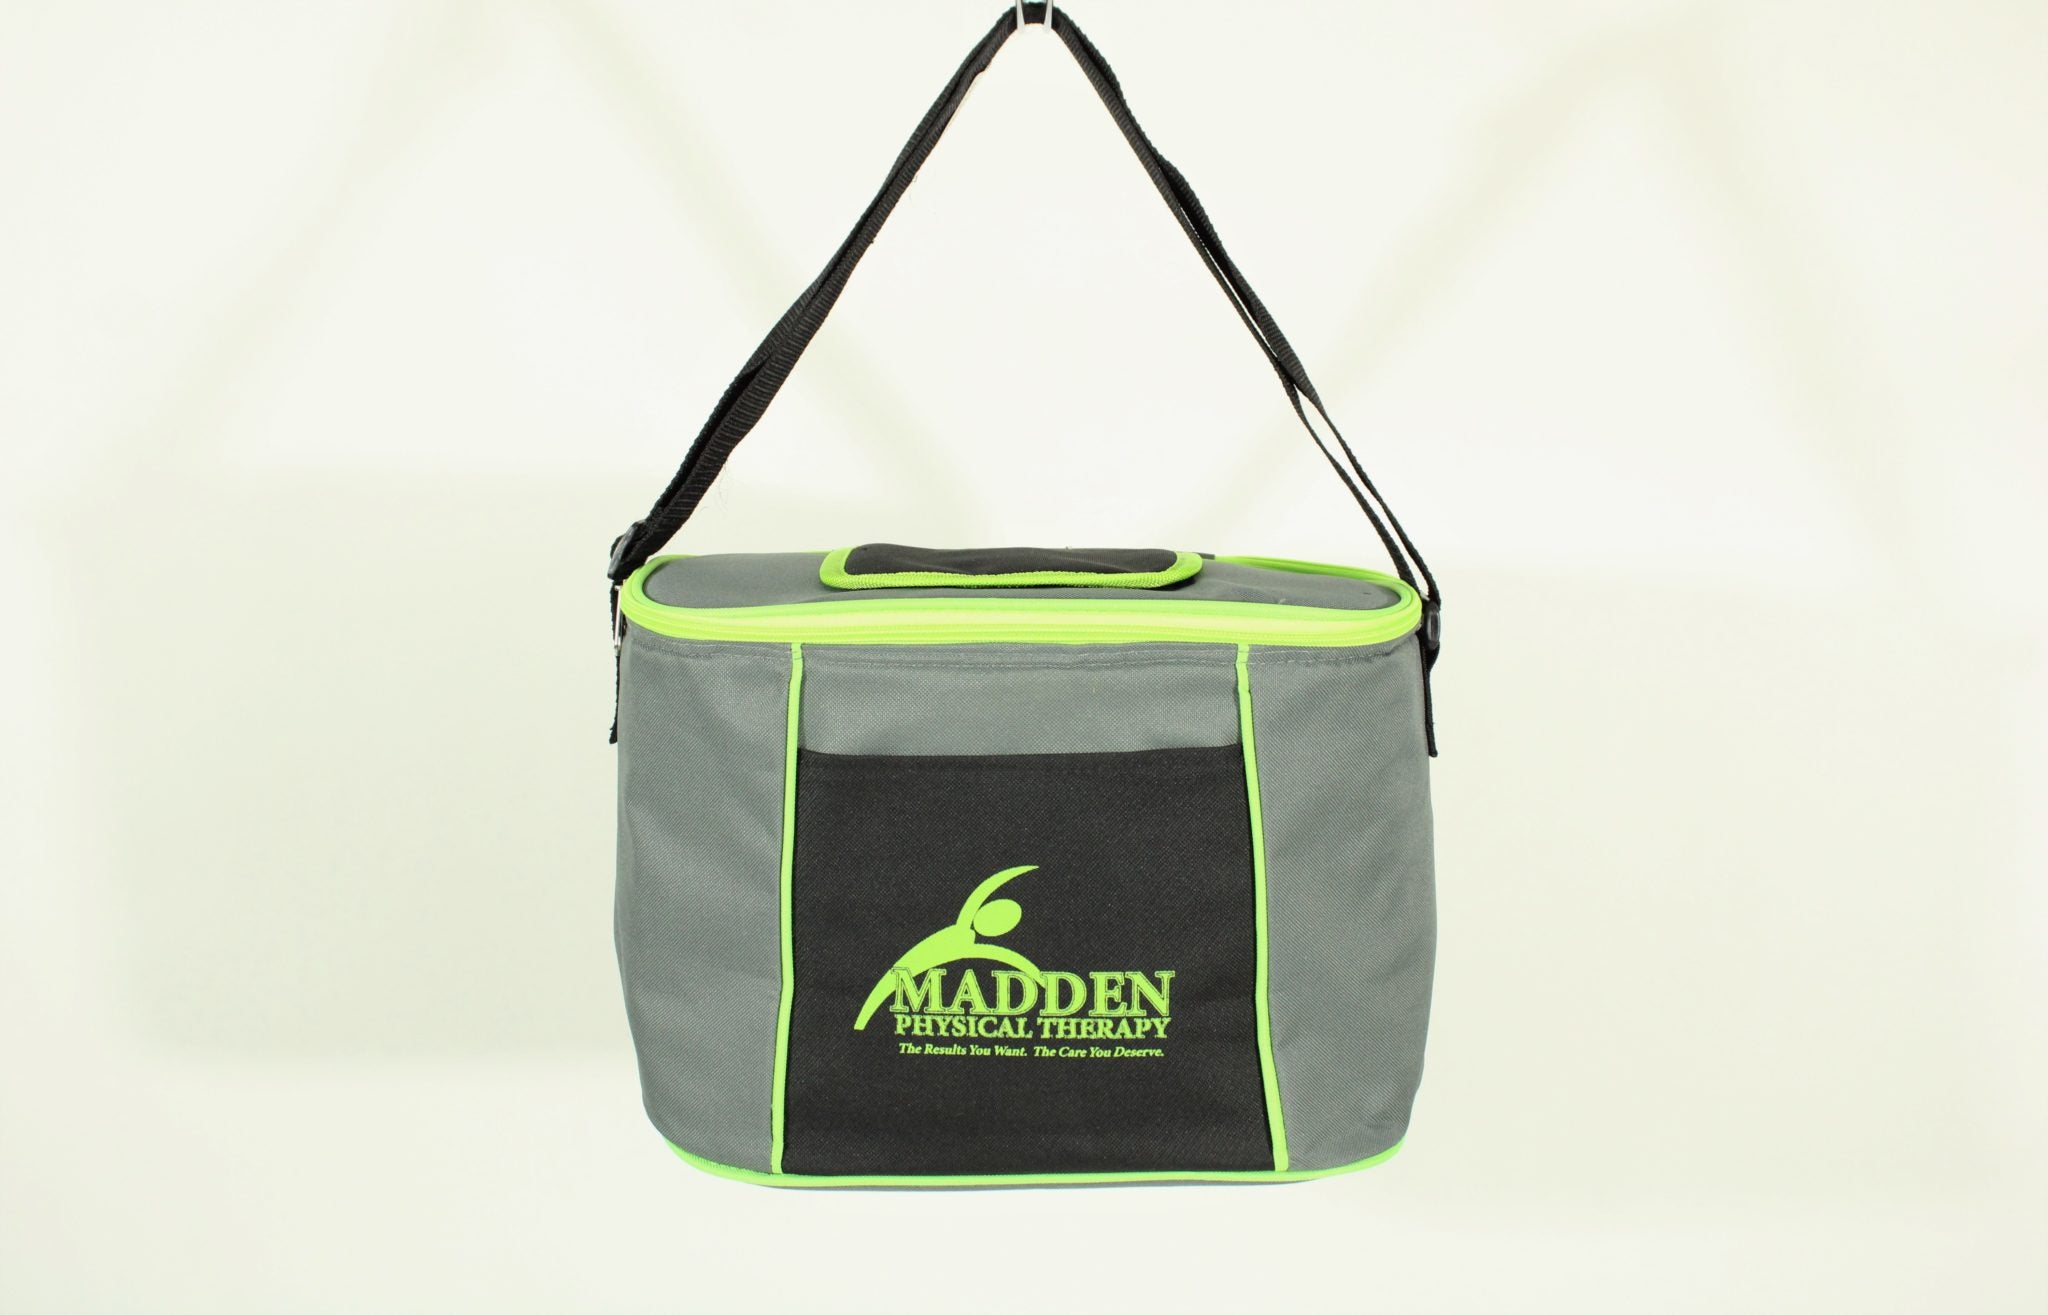 NEW Madden Physical Therapy Cooler Bag